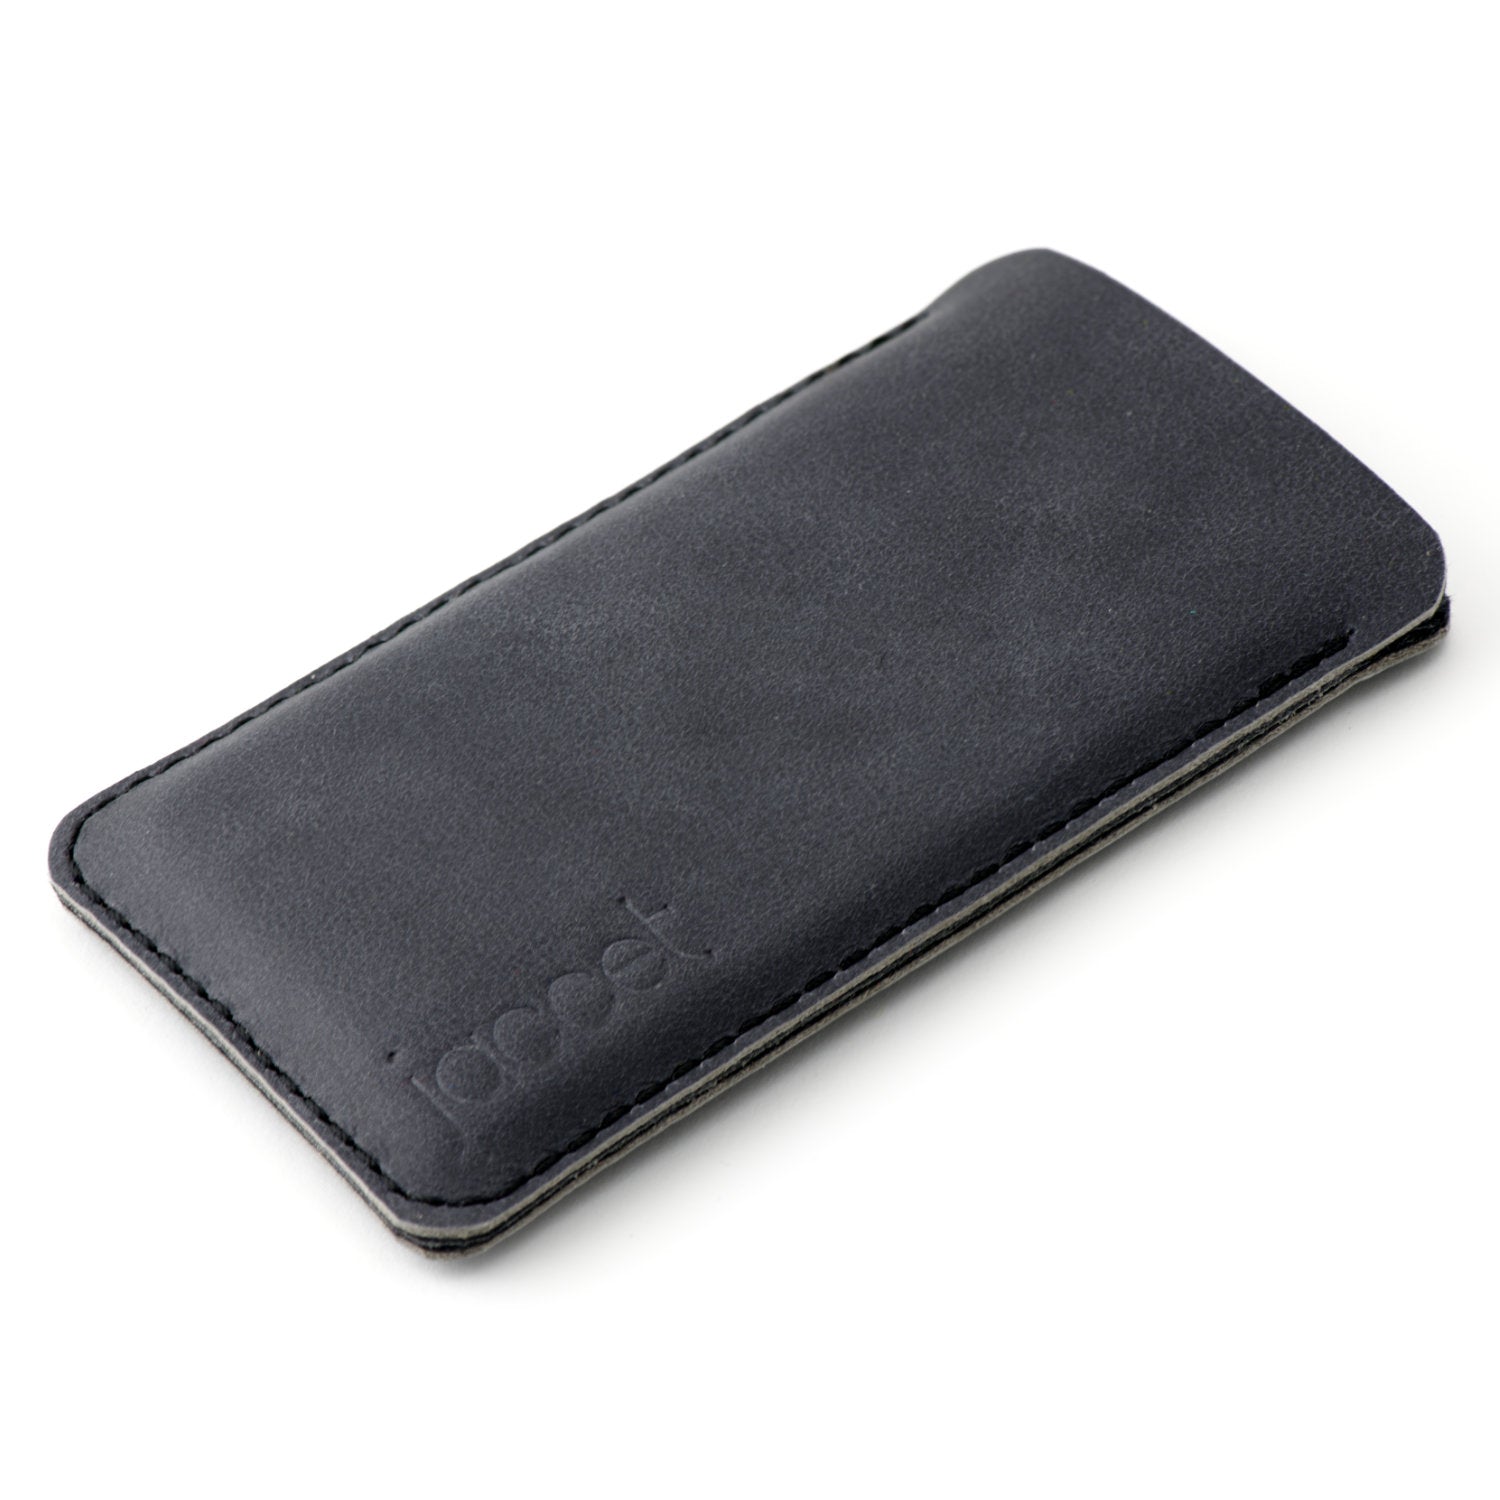 JACCET leather iPhone sleeve - anthracite/black leather with black wool felt. 100% Handmade